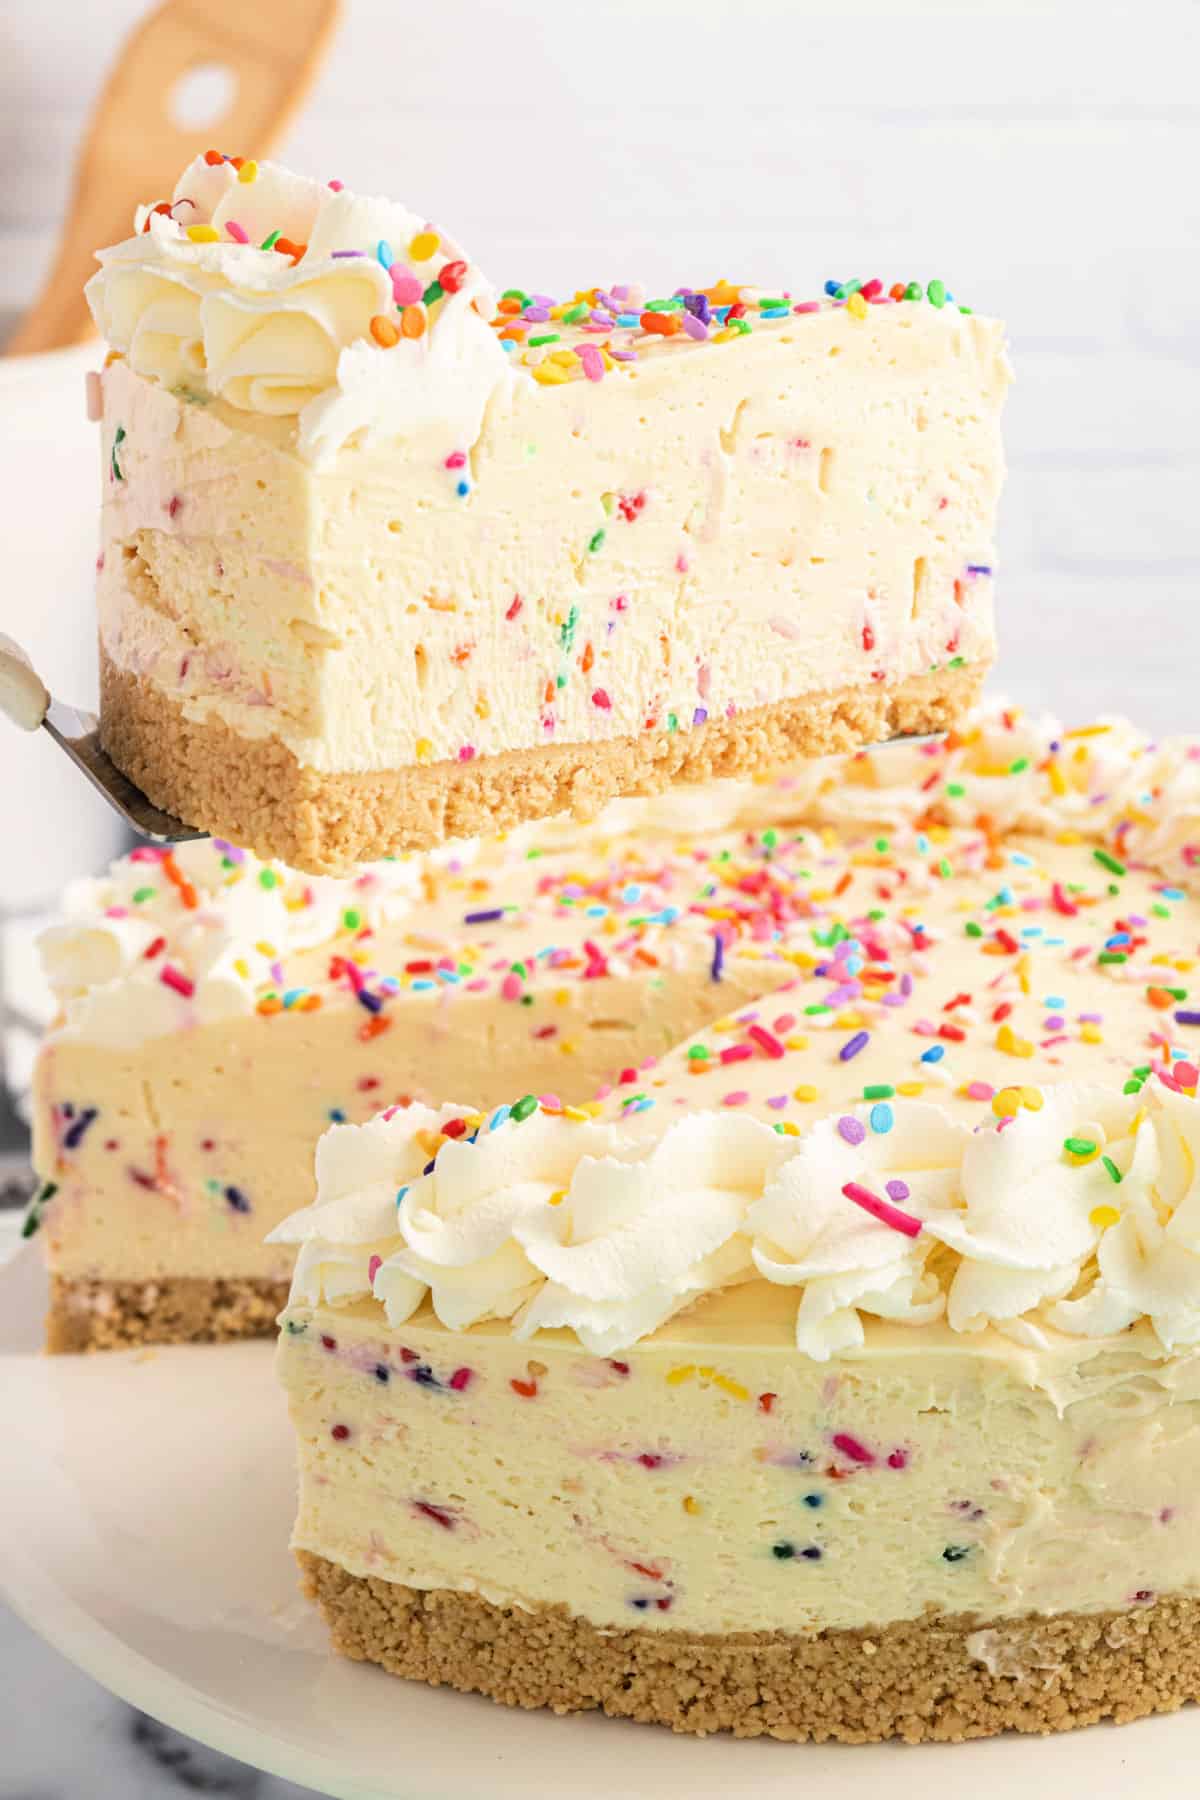 Funfetti cheesecake slice being lifted off cake platter.